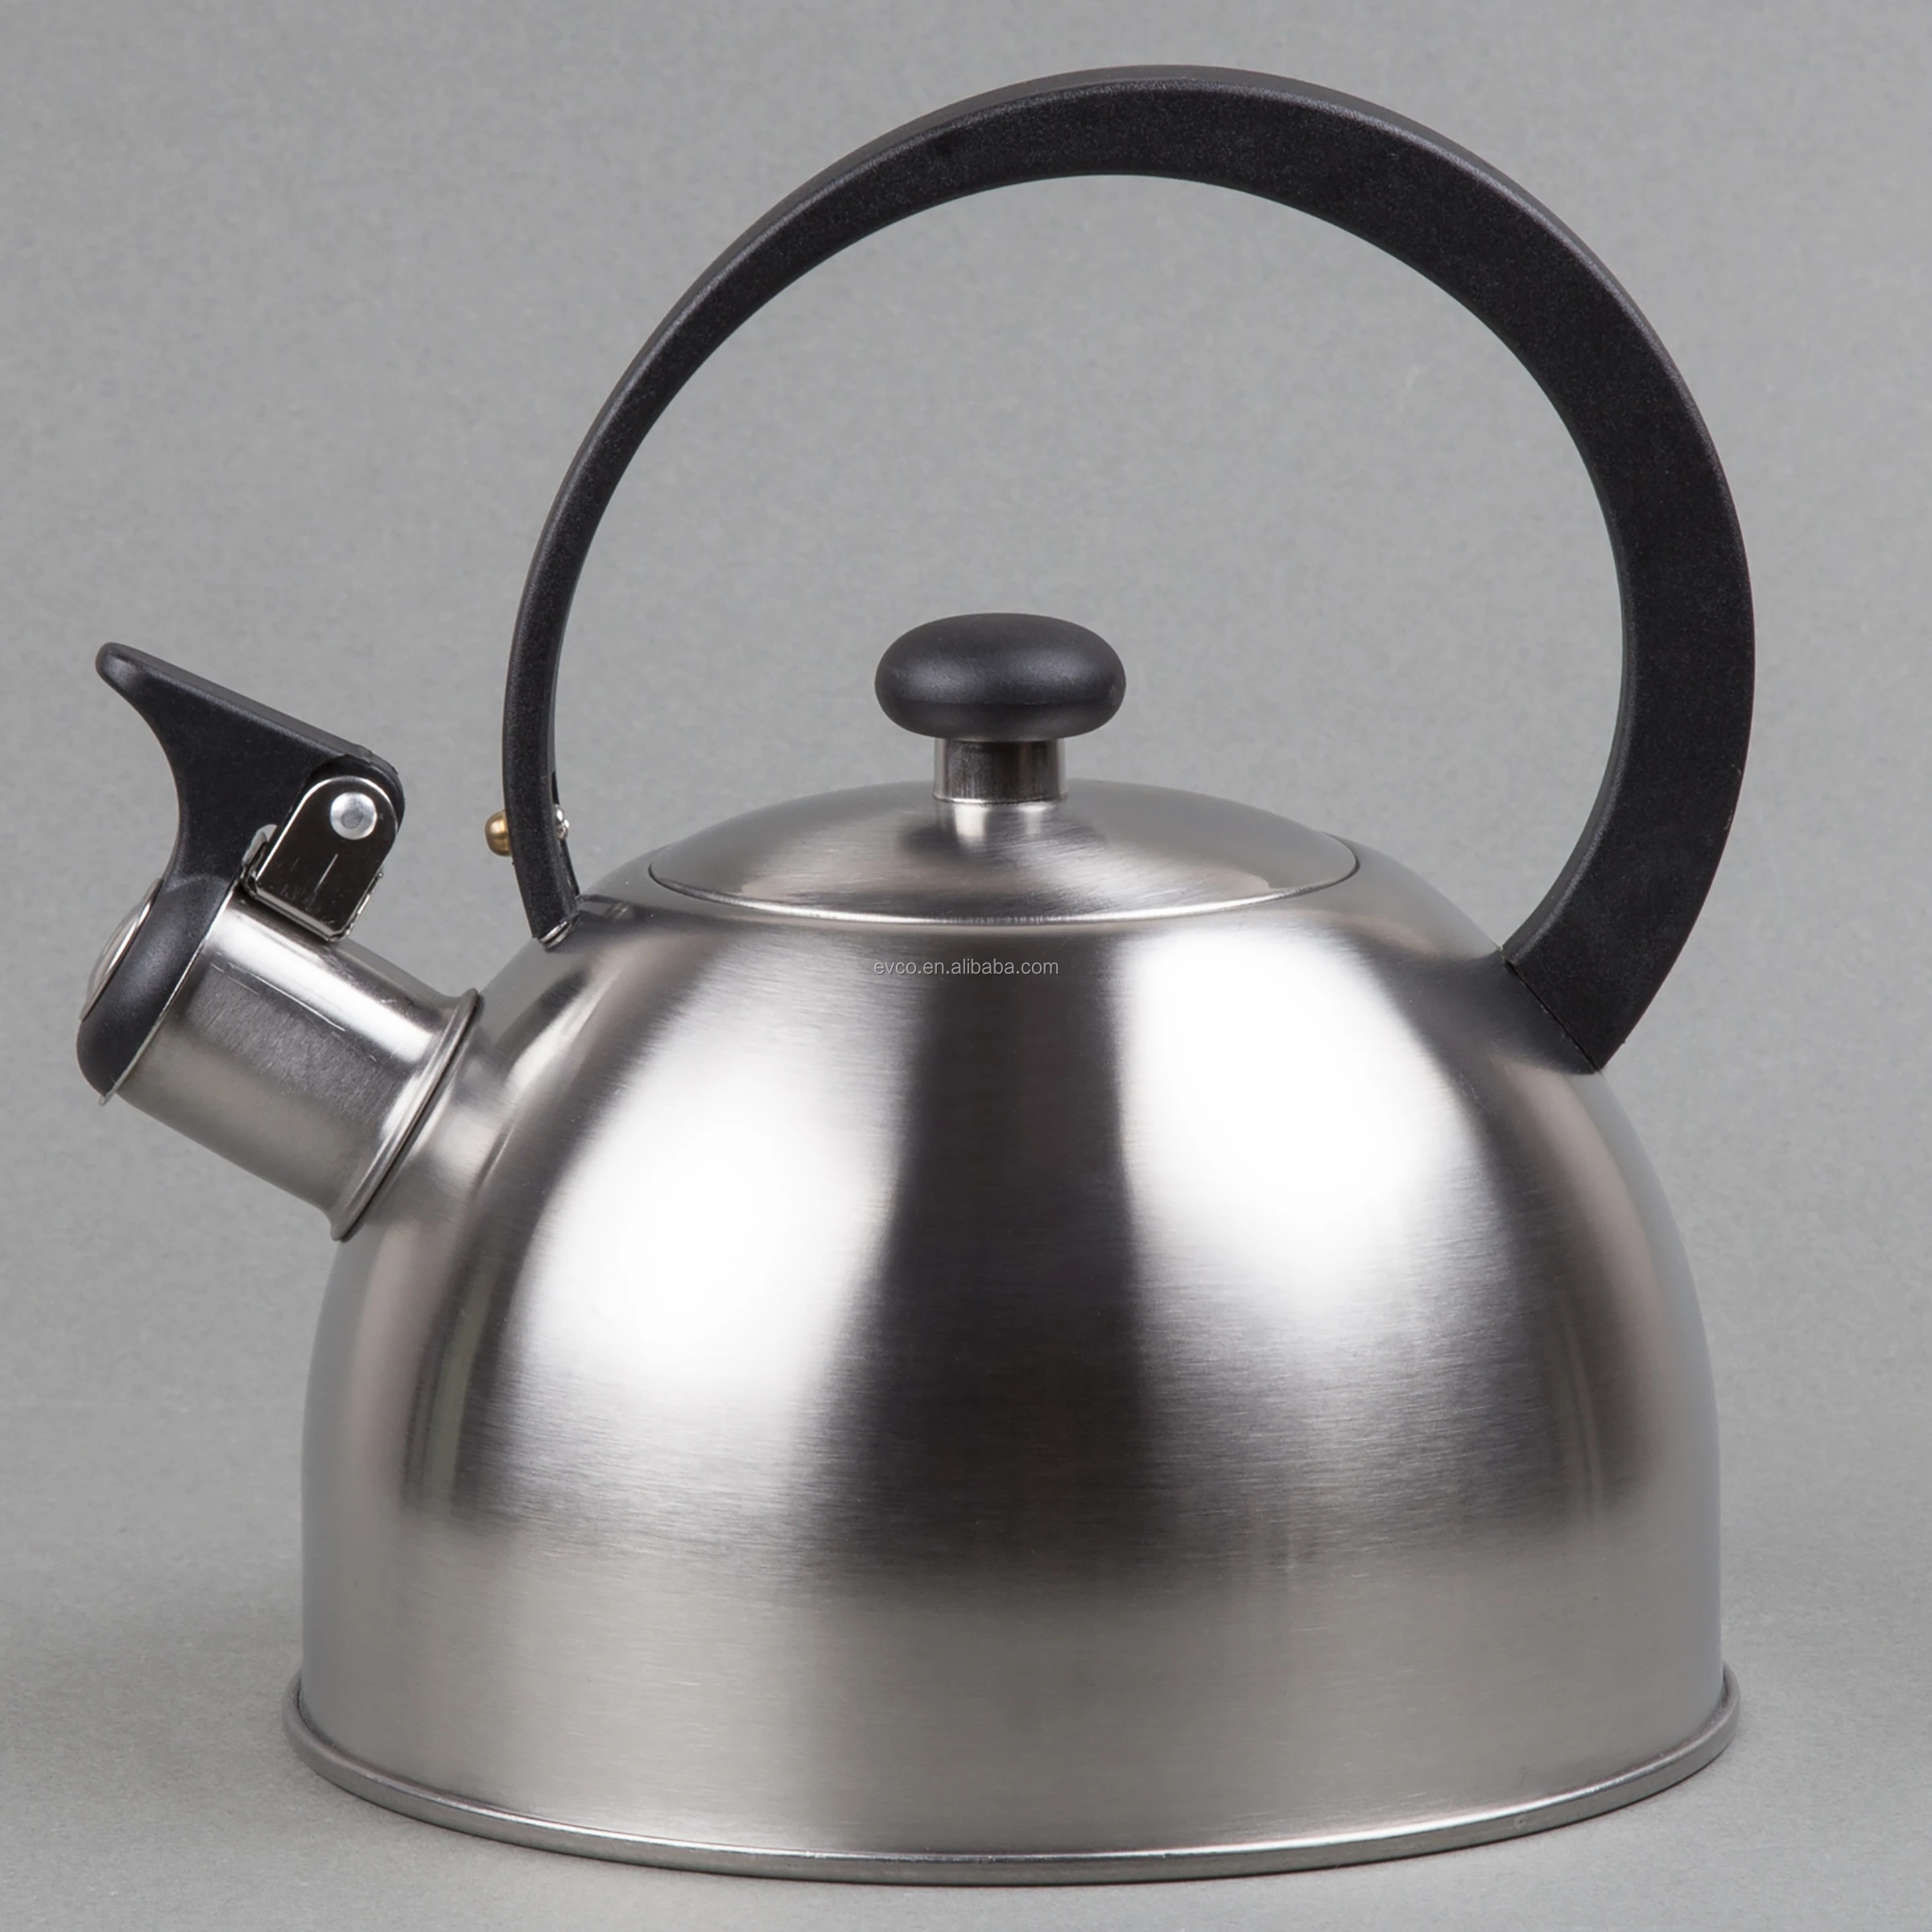 Prelude 2.1 Qt. Stainless Steel Whistling Tea Kettle - All Stainless Steel